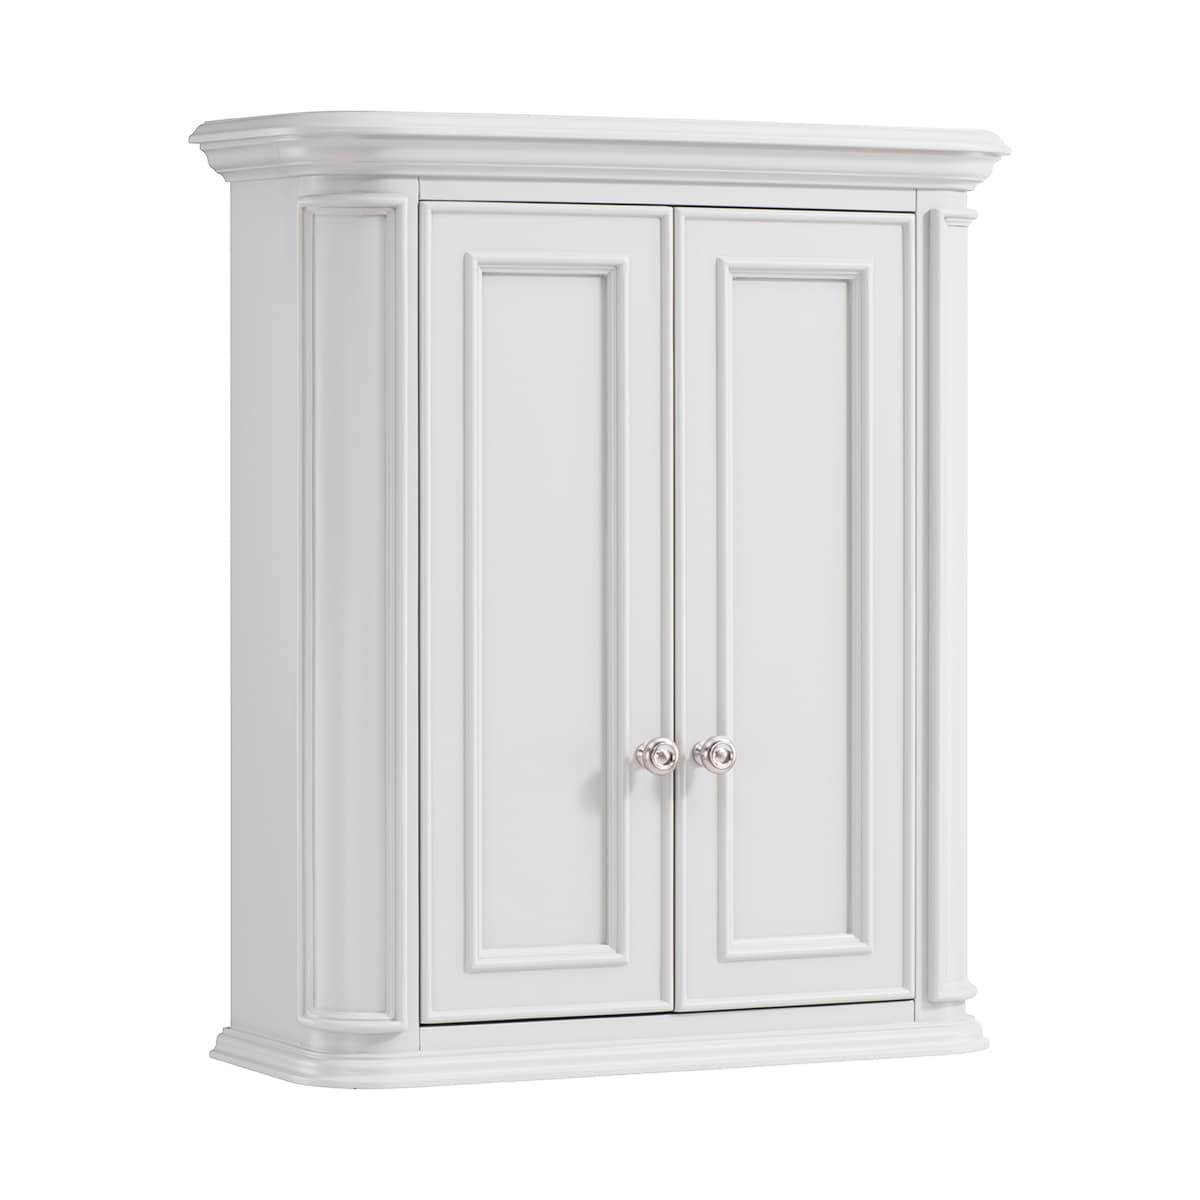 Wrightsville 26-in x 30-in x 10-in White Soft Close Bathroom Wall Cabinet | - allen + roth 1116WC-26-201